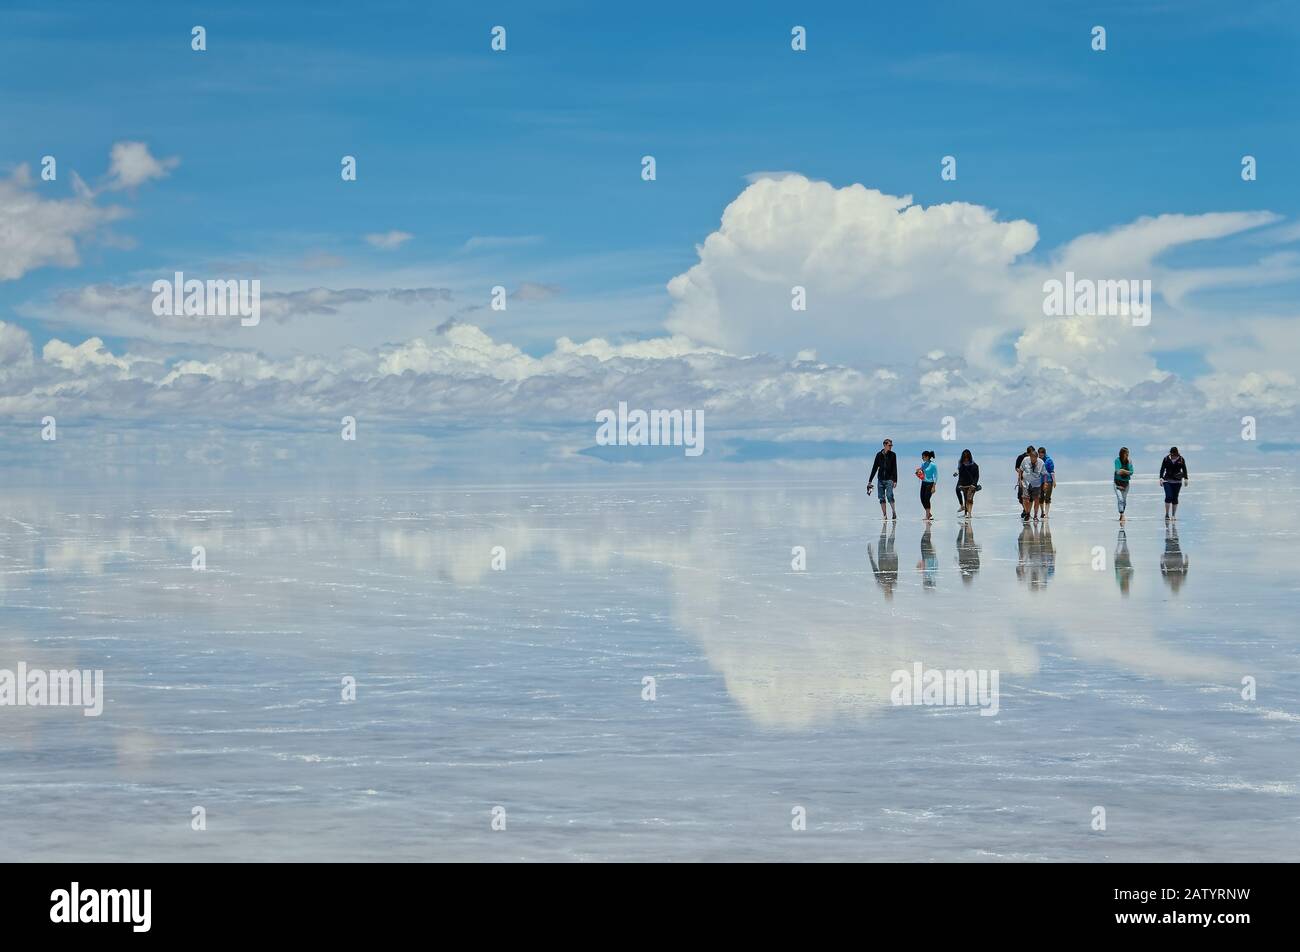 An exploration day over Uyuni salt flat, shows amazing sky's reflections over flooded salt flat, such beautiful images extends on endless horizon. Stock Photo